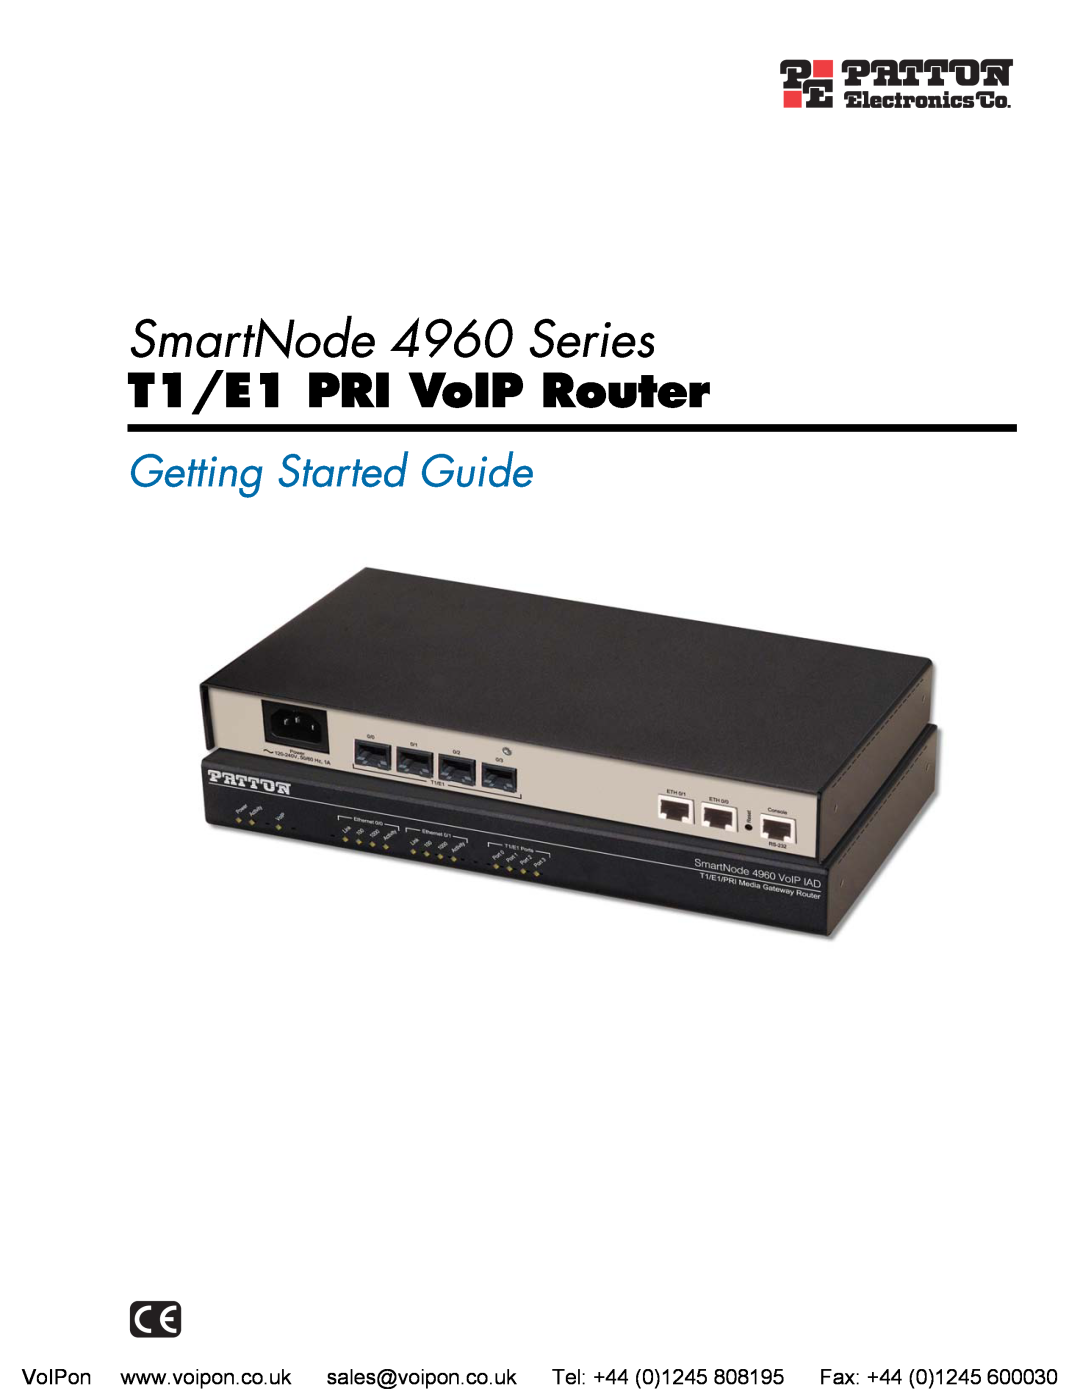 Patton electronic manual SmartNode 4960 Series, T1/E1 PRI VoIP Router, Getting Started Guide 